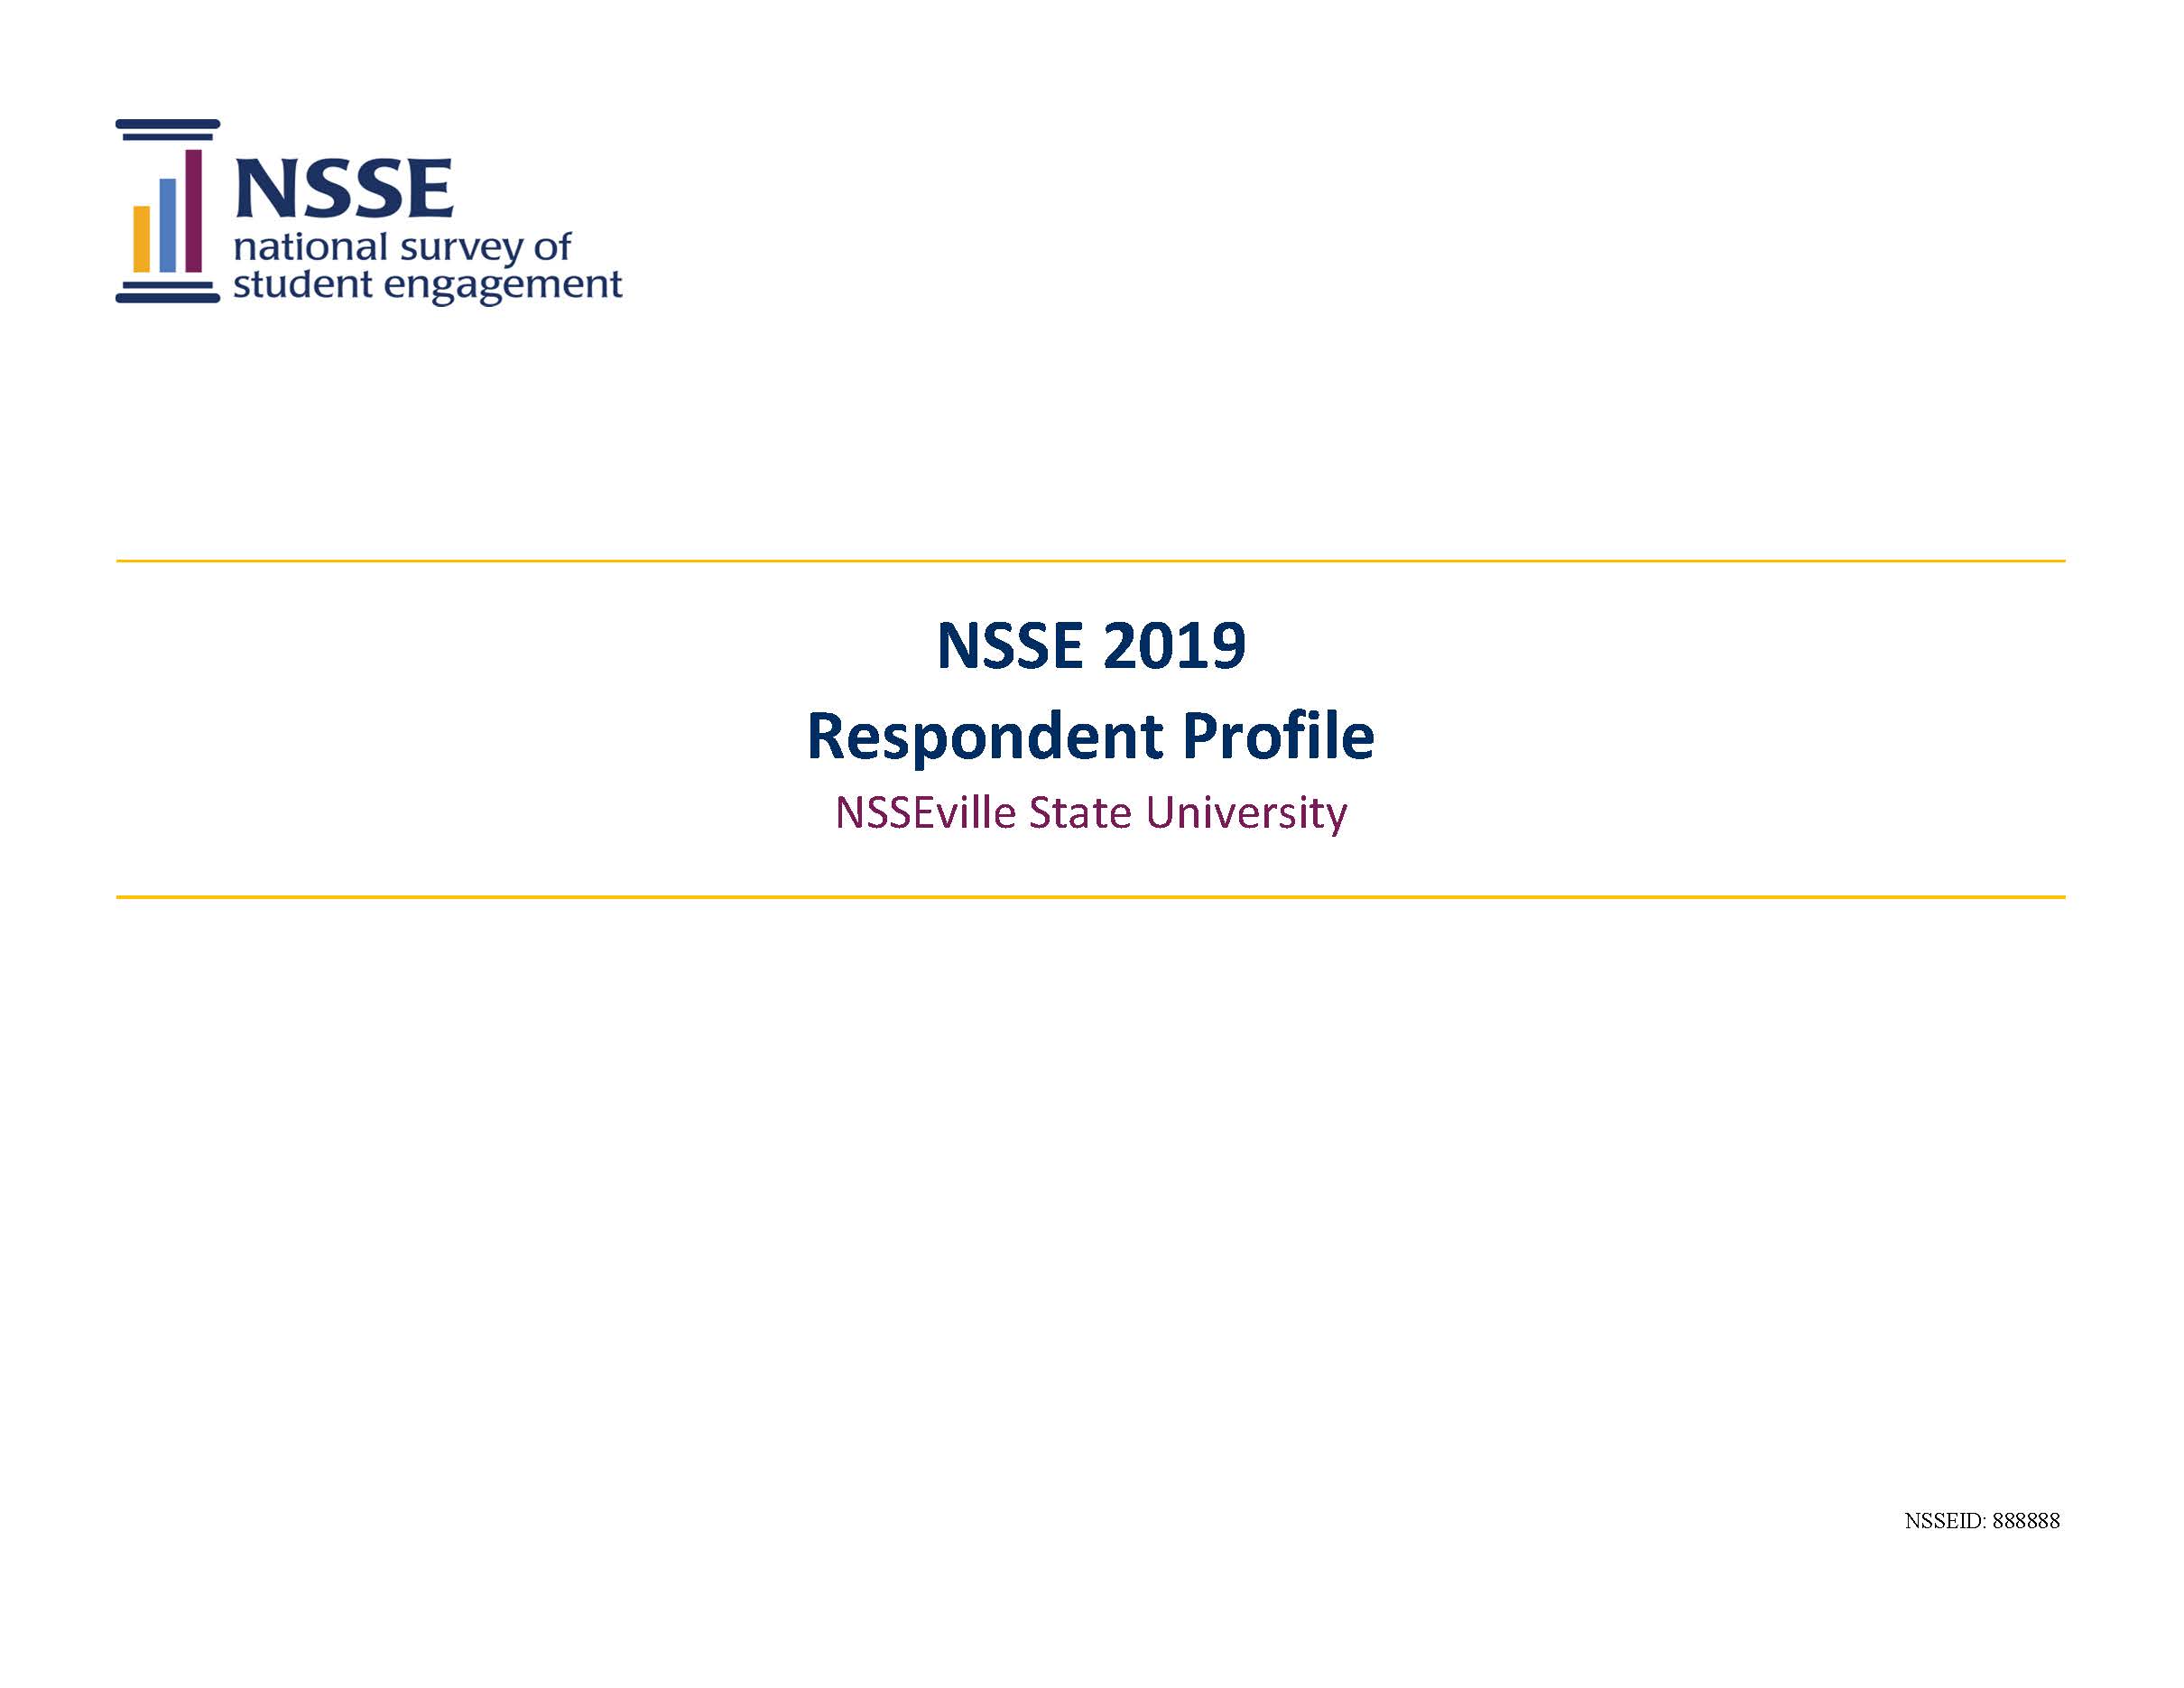 Sample Report: page 1 of NSSE Respondent Profile 